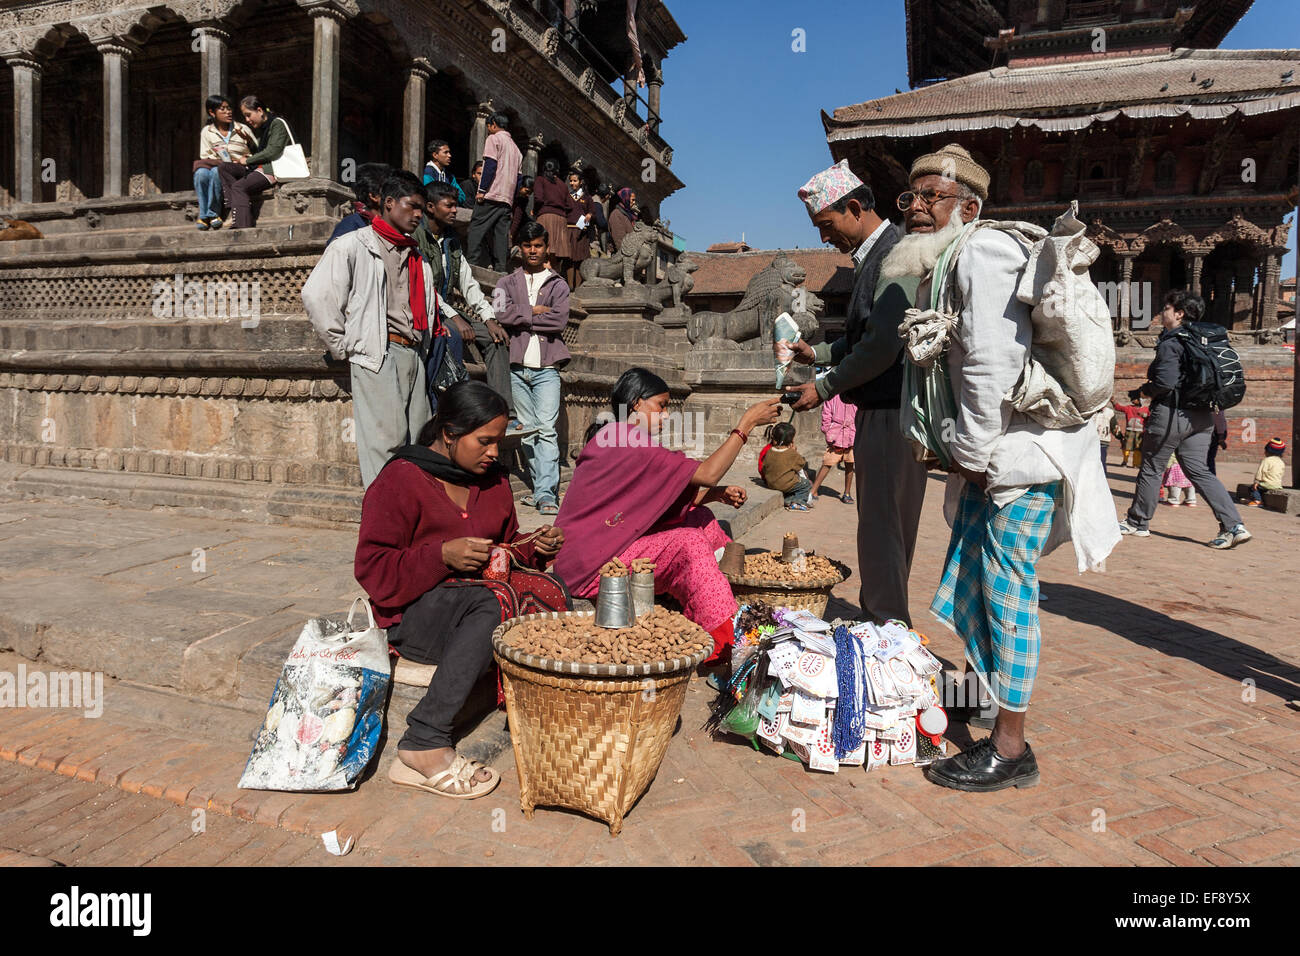 Peanut sellers in front of the Krishna Temple, Durbar Square, Ppatan, Nepal Stock Photo